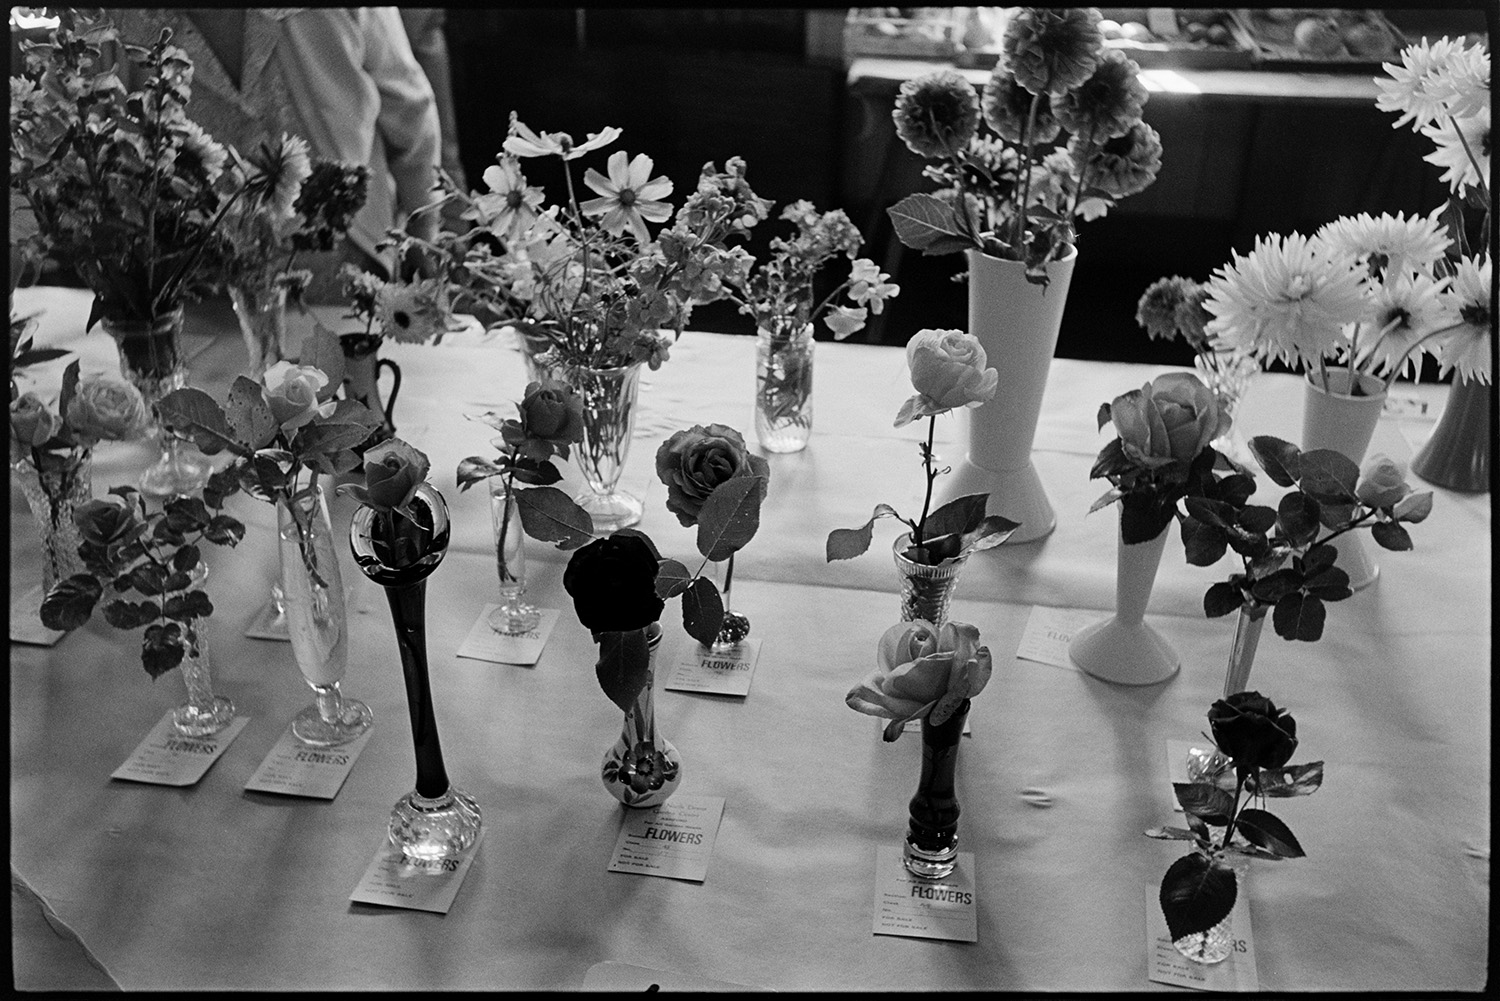 Flower show, displays of roses, cakes, vegetables, skittle alley.
[A display of flowers in vases on a table at Dolton Flower Show, in Dolton village hall. Amongst the display are roses and dahlias.]